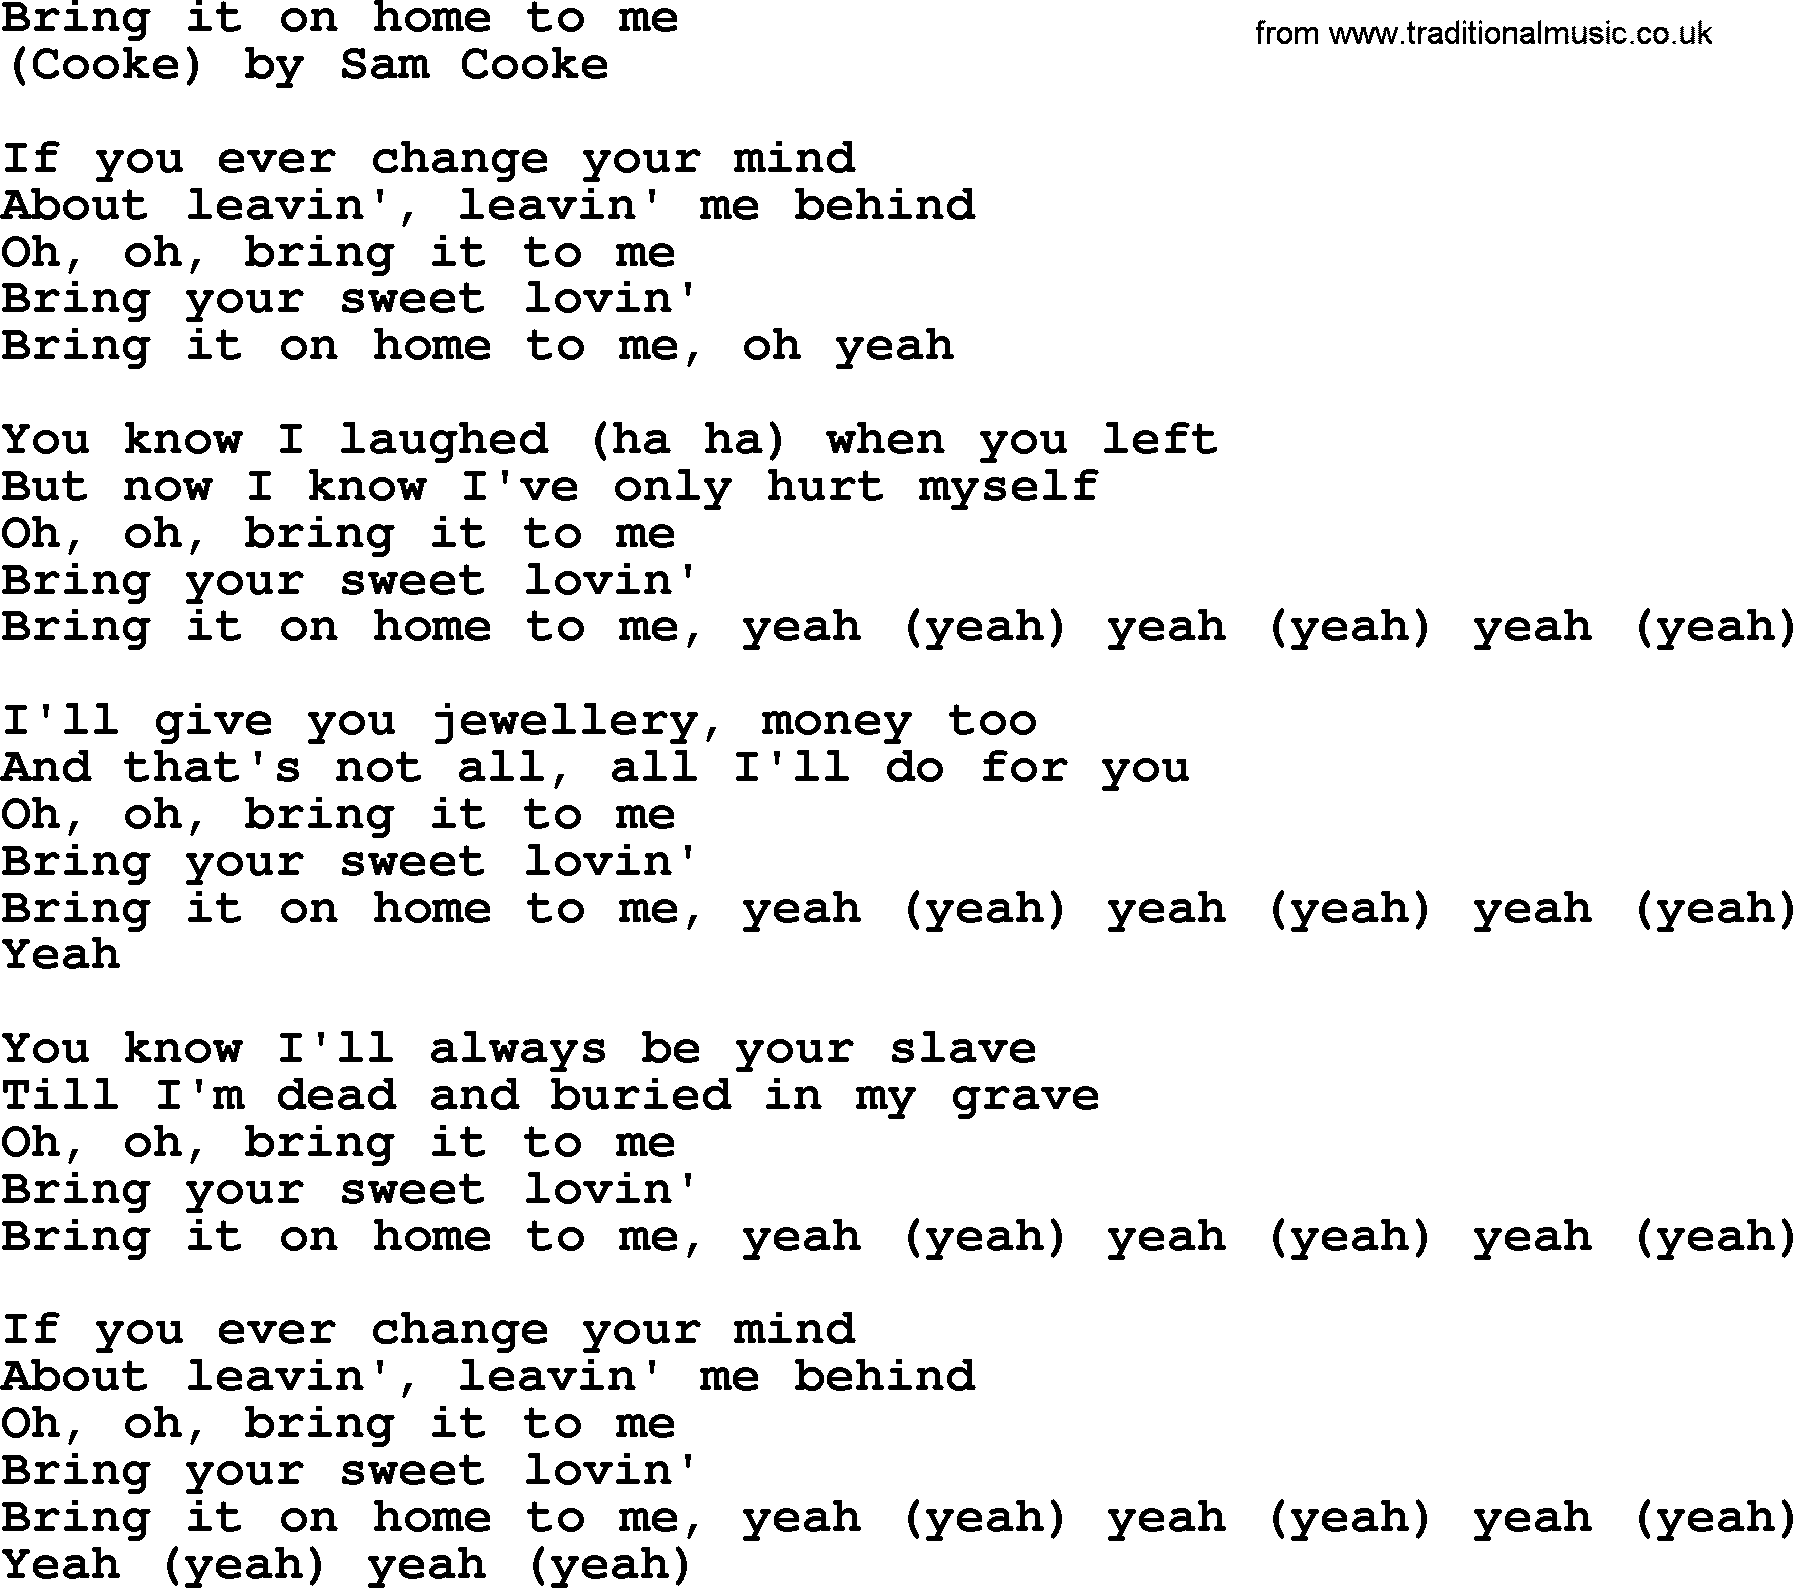 Bruce Springsteen song: Bring It On Home To Me lyrics